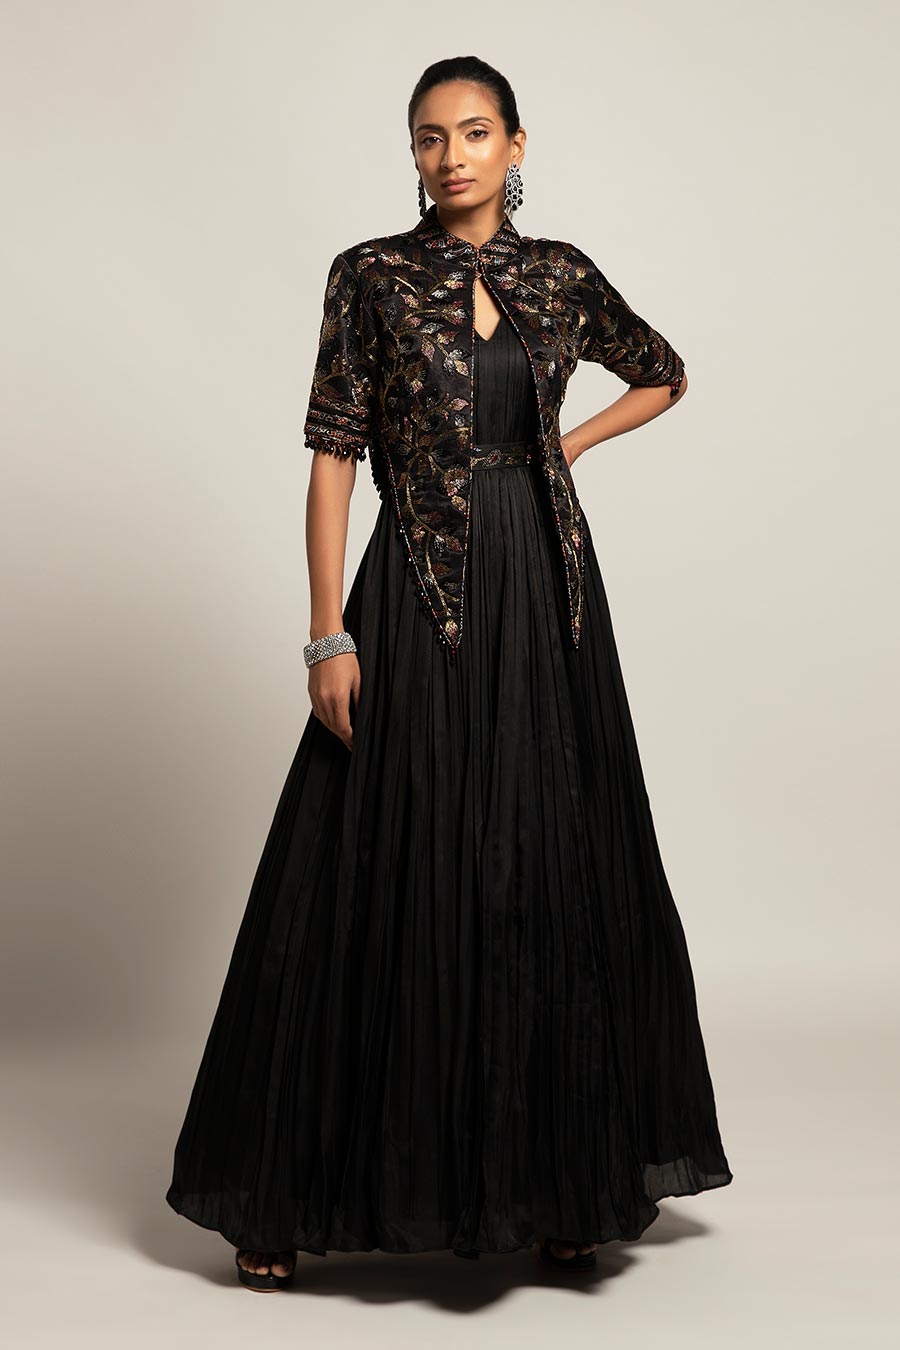 DESIGNER FAUX BLOOMING black gown